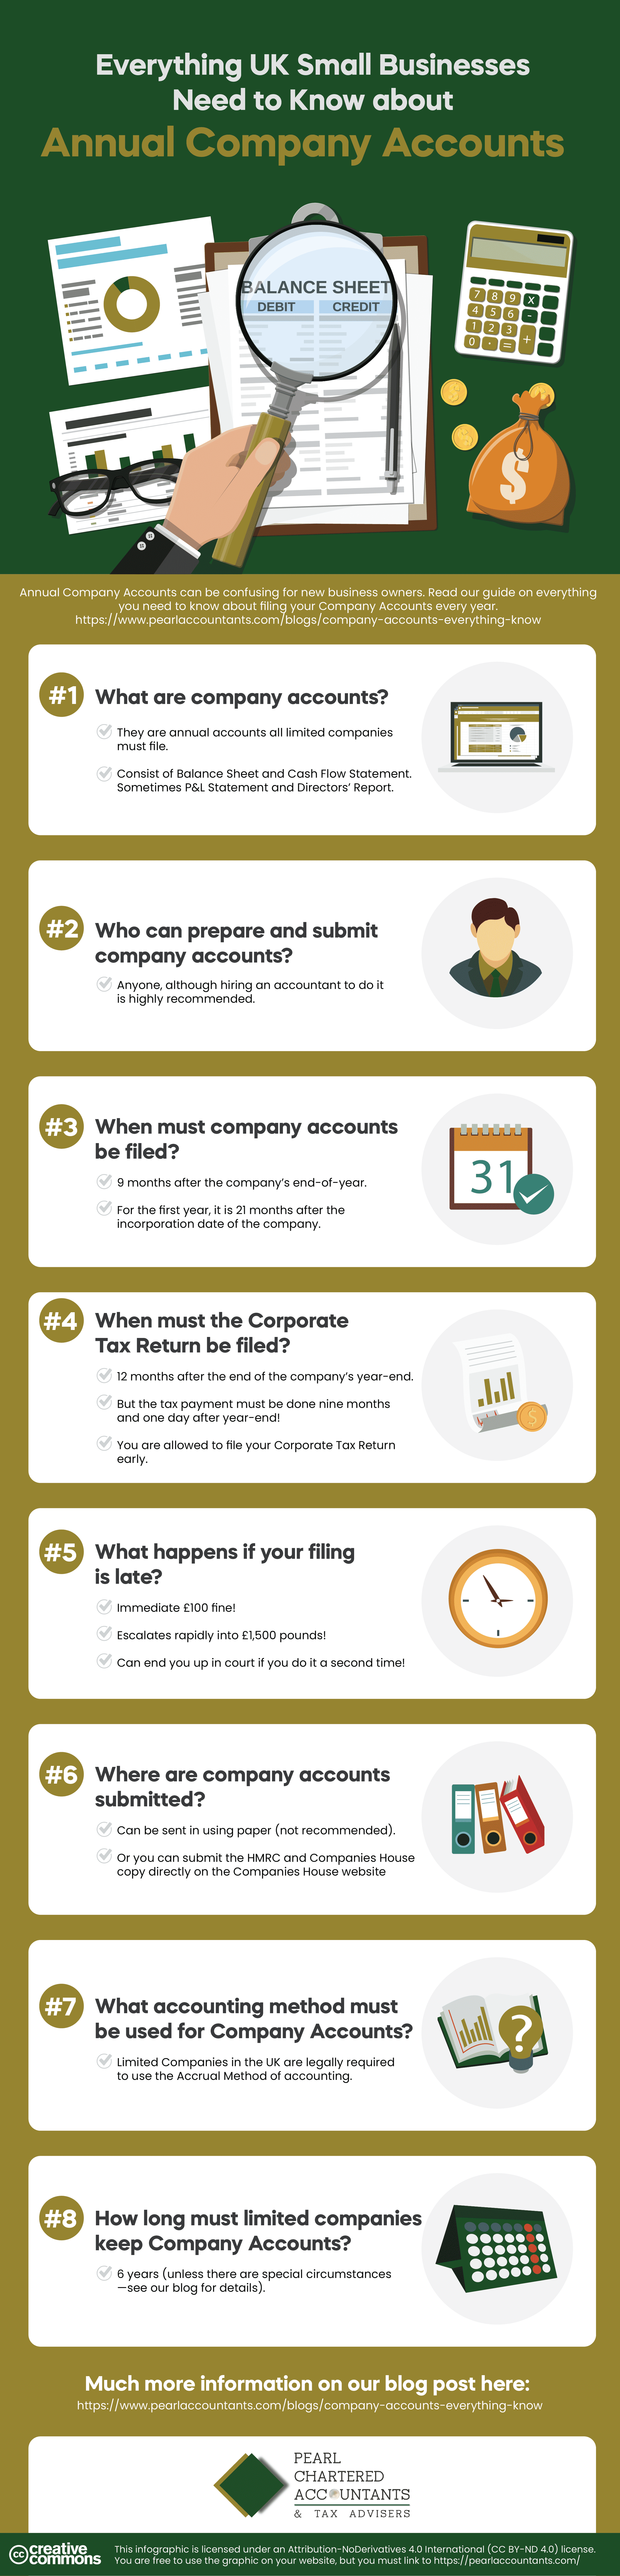 Everything UK Small Businesses Need to Know about Annual Company Accounts